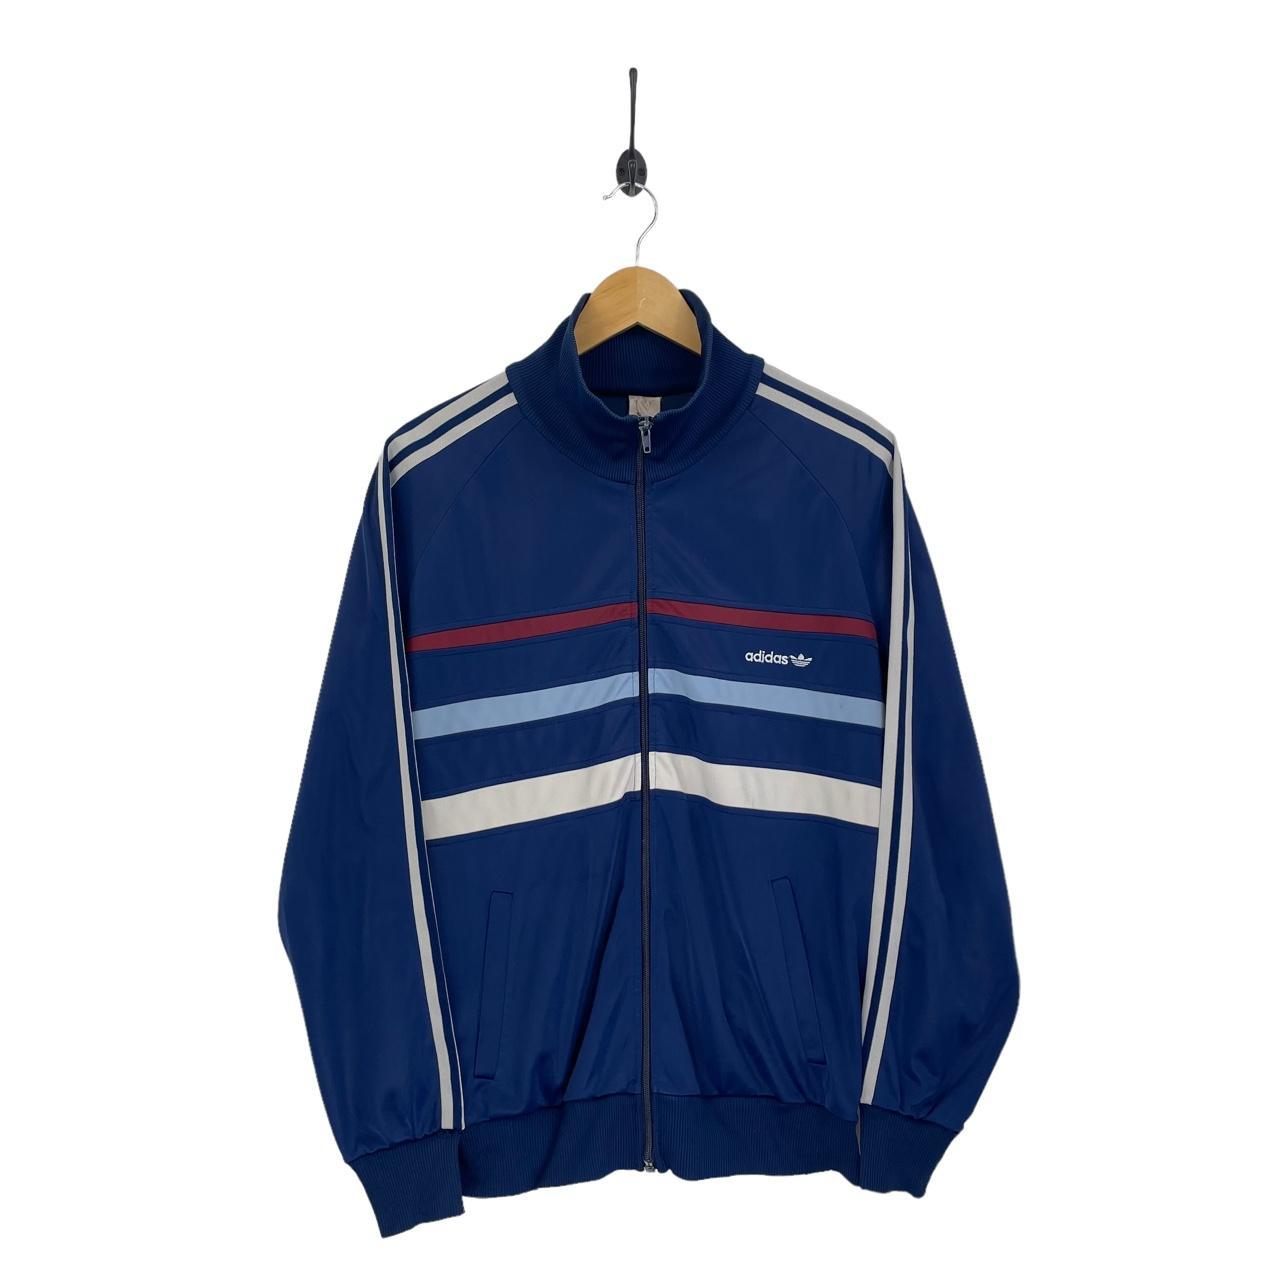 Vintage Adidas 80s Jacket Navy, white and blue 80s... - Depop